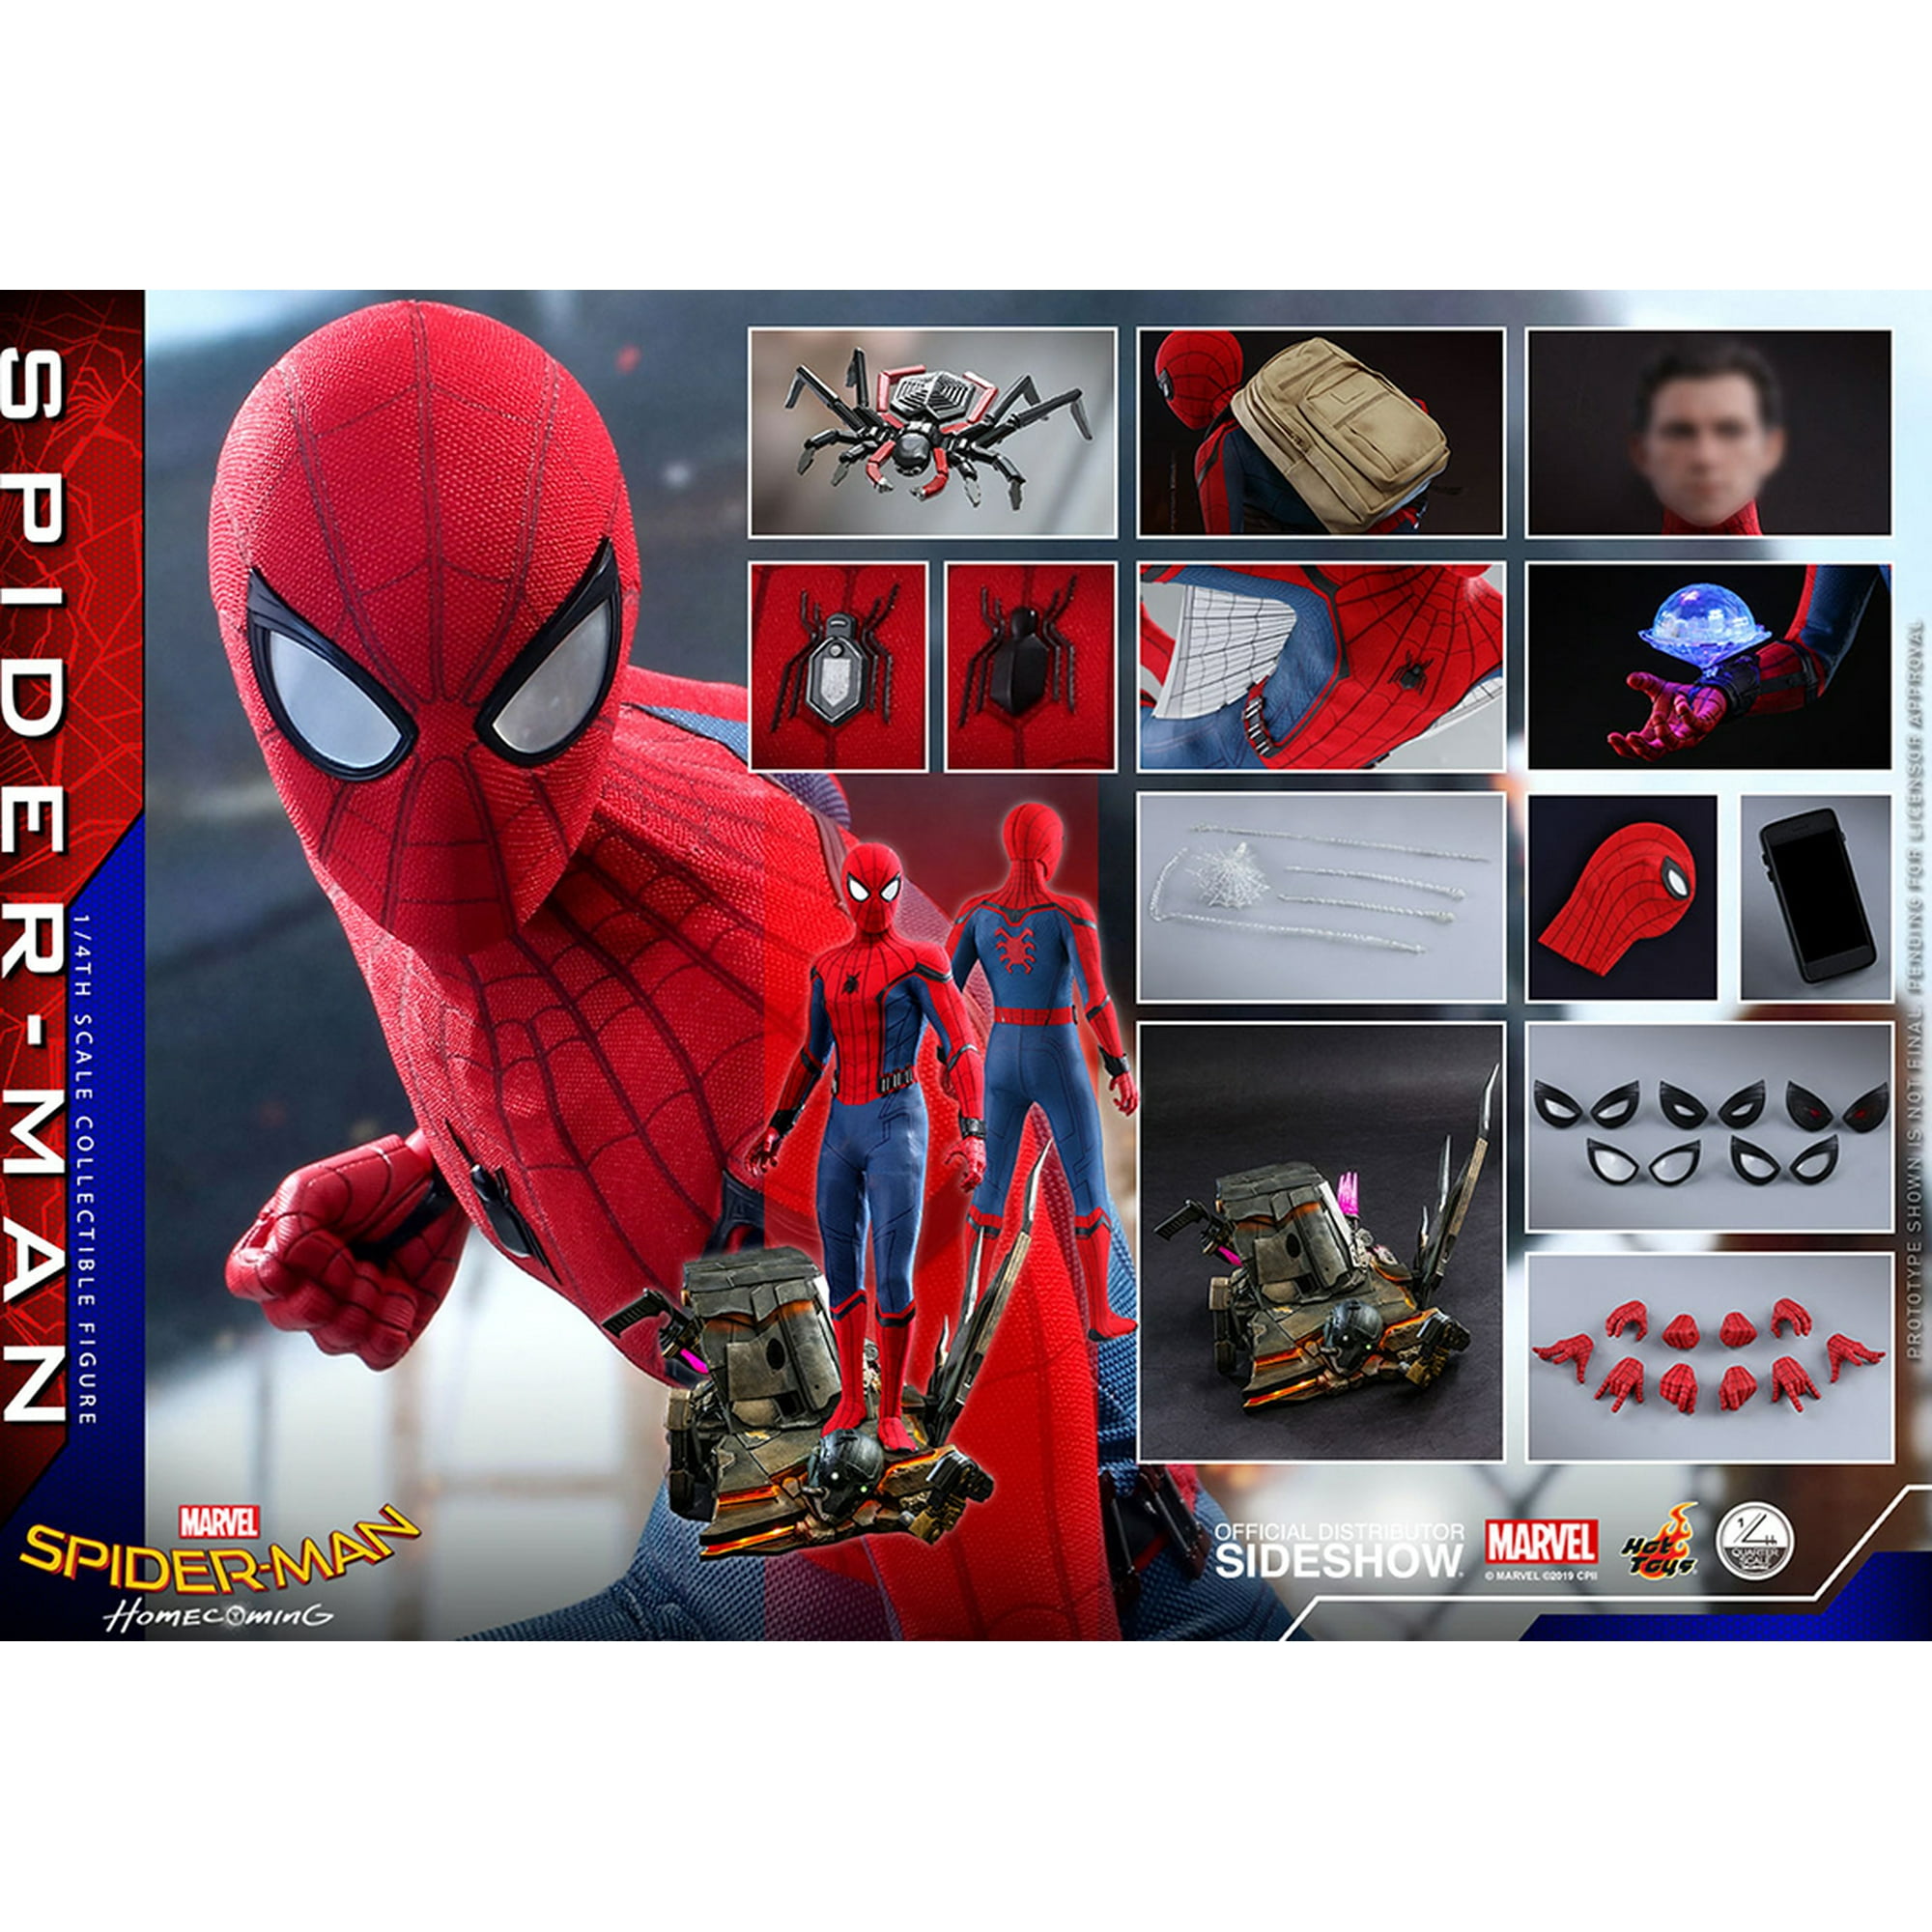 Spider-Man Homecoming 17 Inch Action Figure 1/4 Scale Series - Spider-Man  Hot Toys 905037 | Walmart Canada